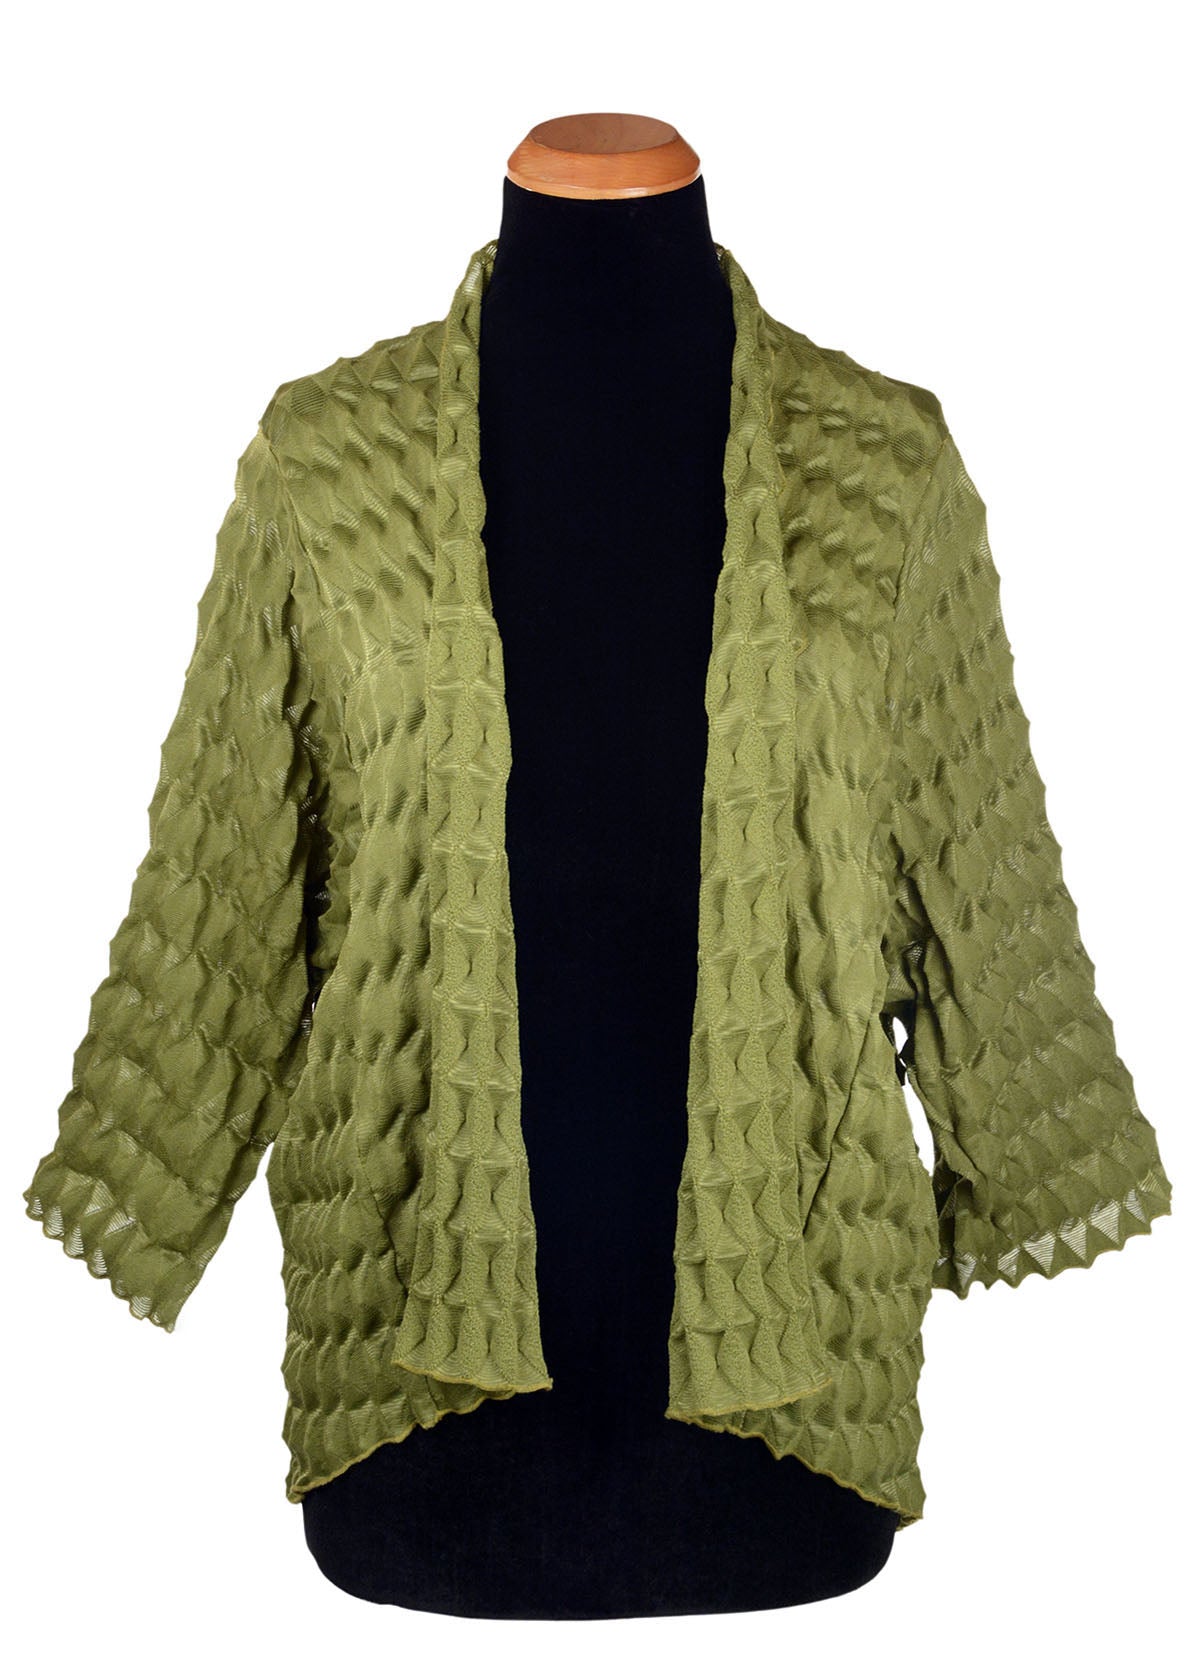 Product photo of the Fractal Collection Avocado Cardigan. LYC by Pandemonium is handmade in Seattle, WA, USA.